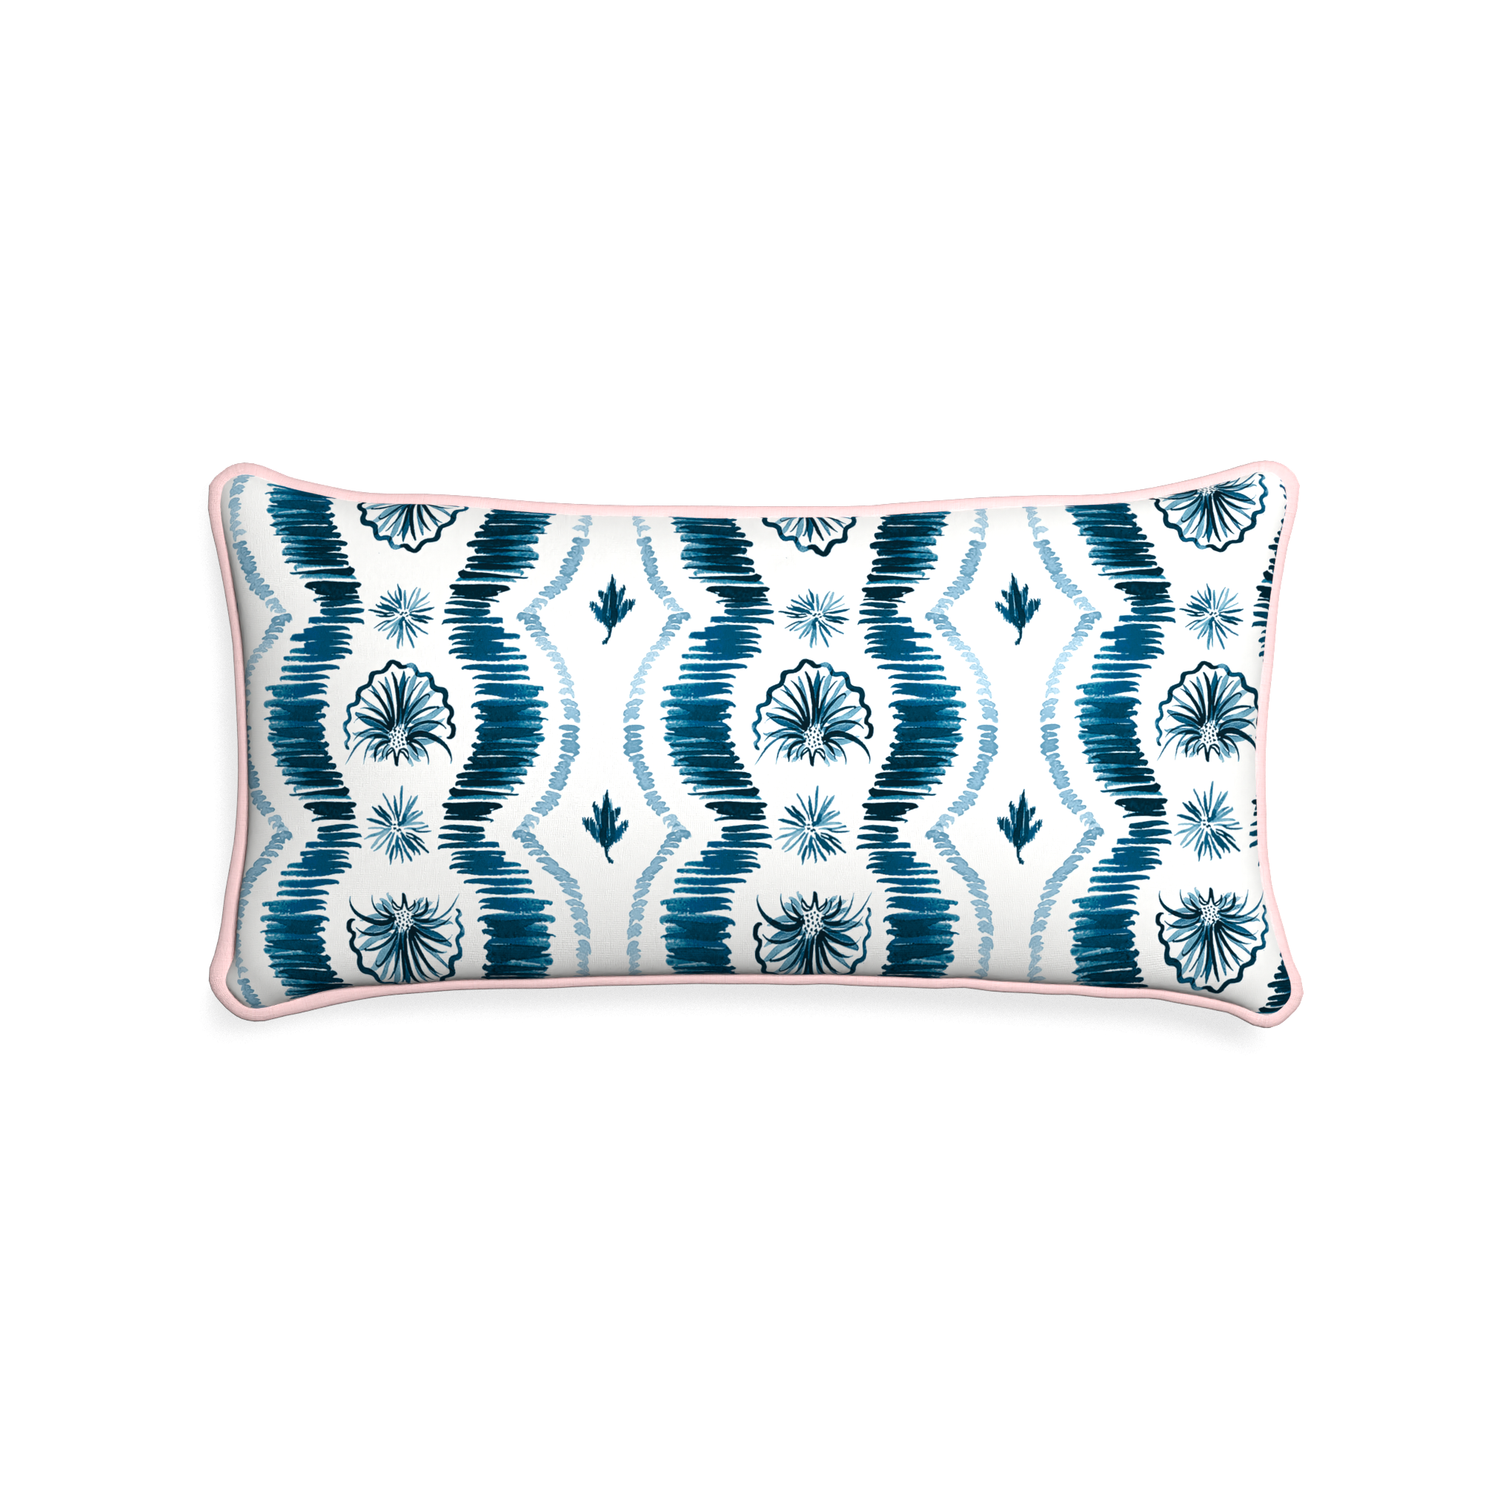 Midi-lumbar alice custom blue ikatpillow with petal piping on white background